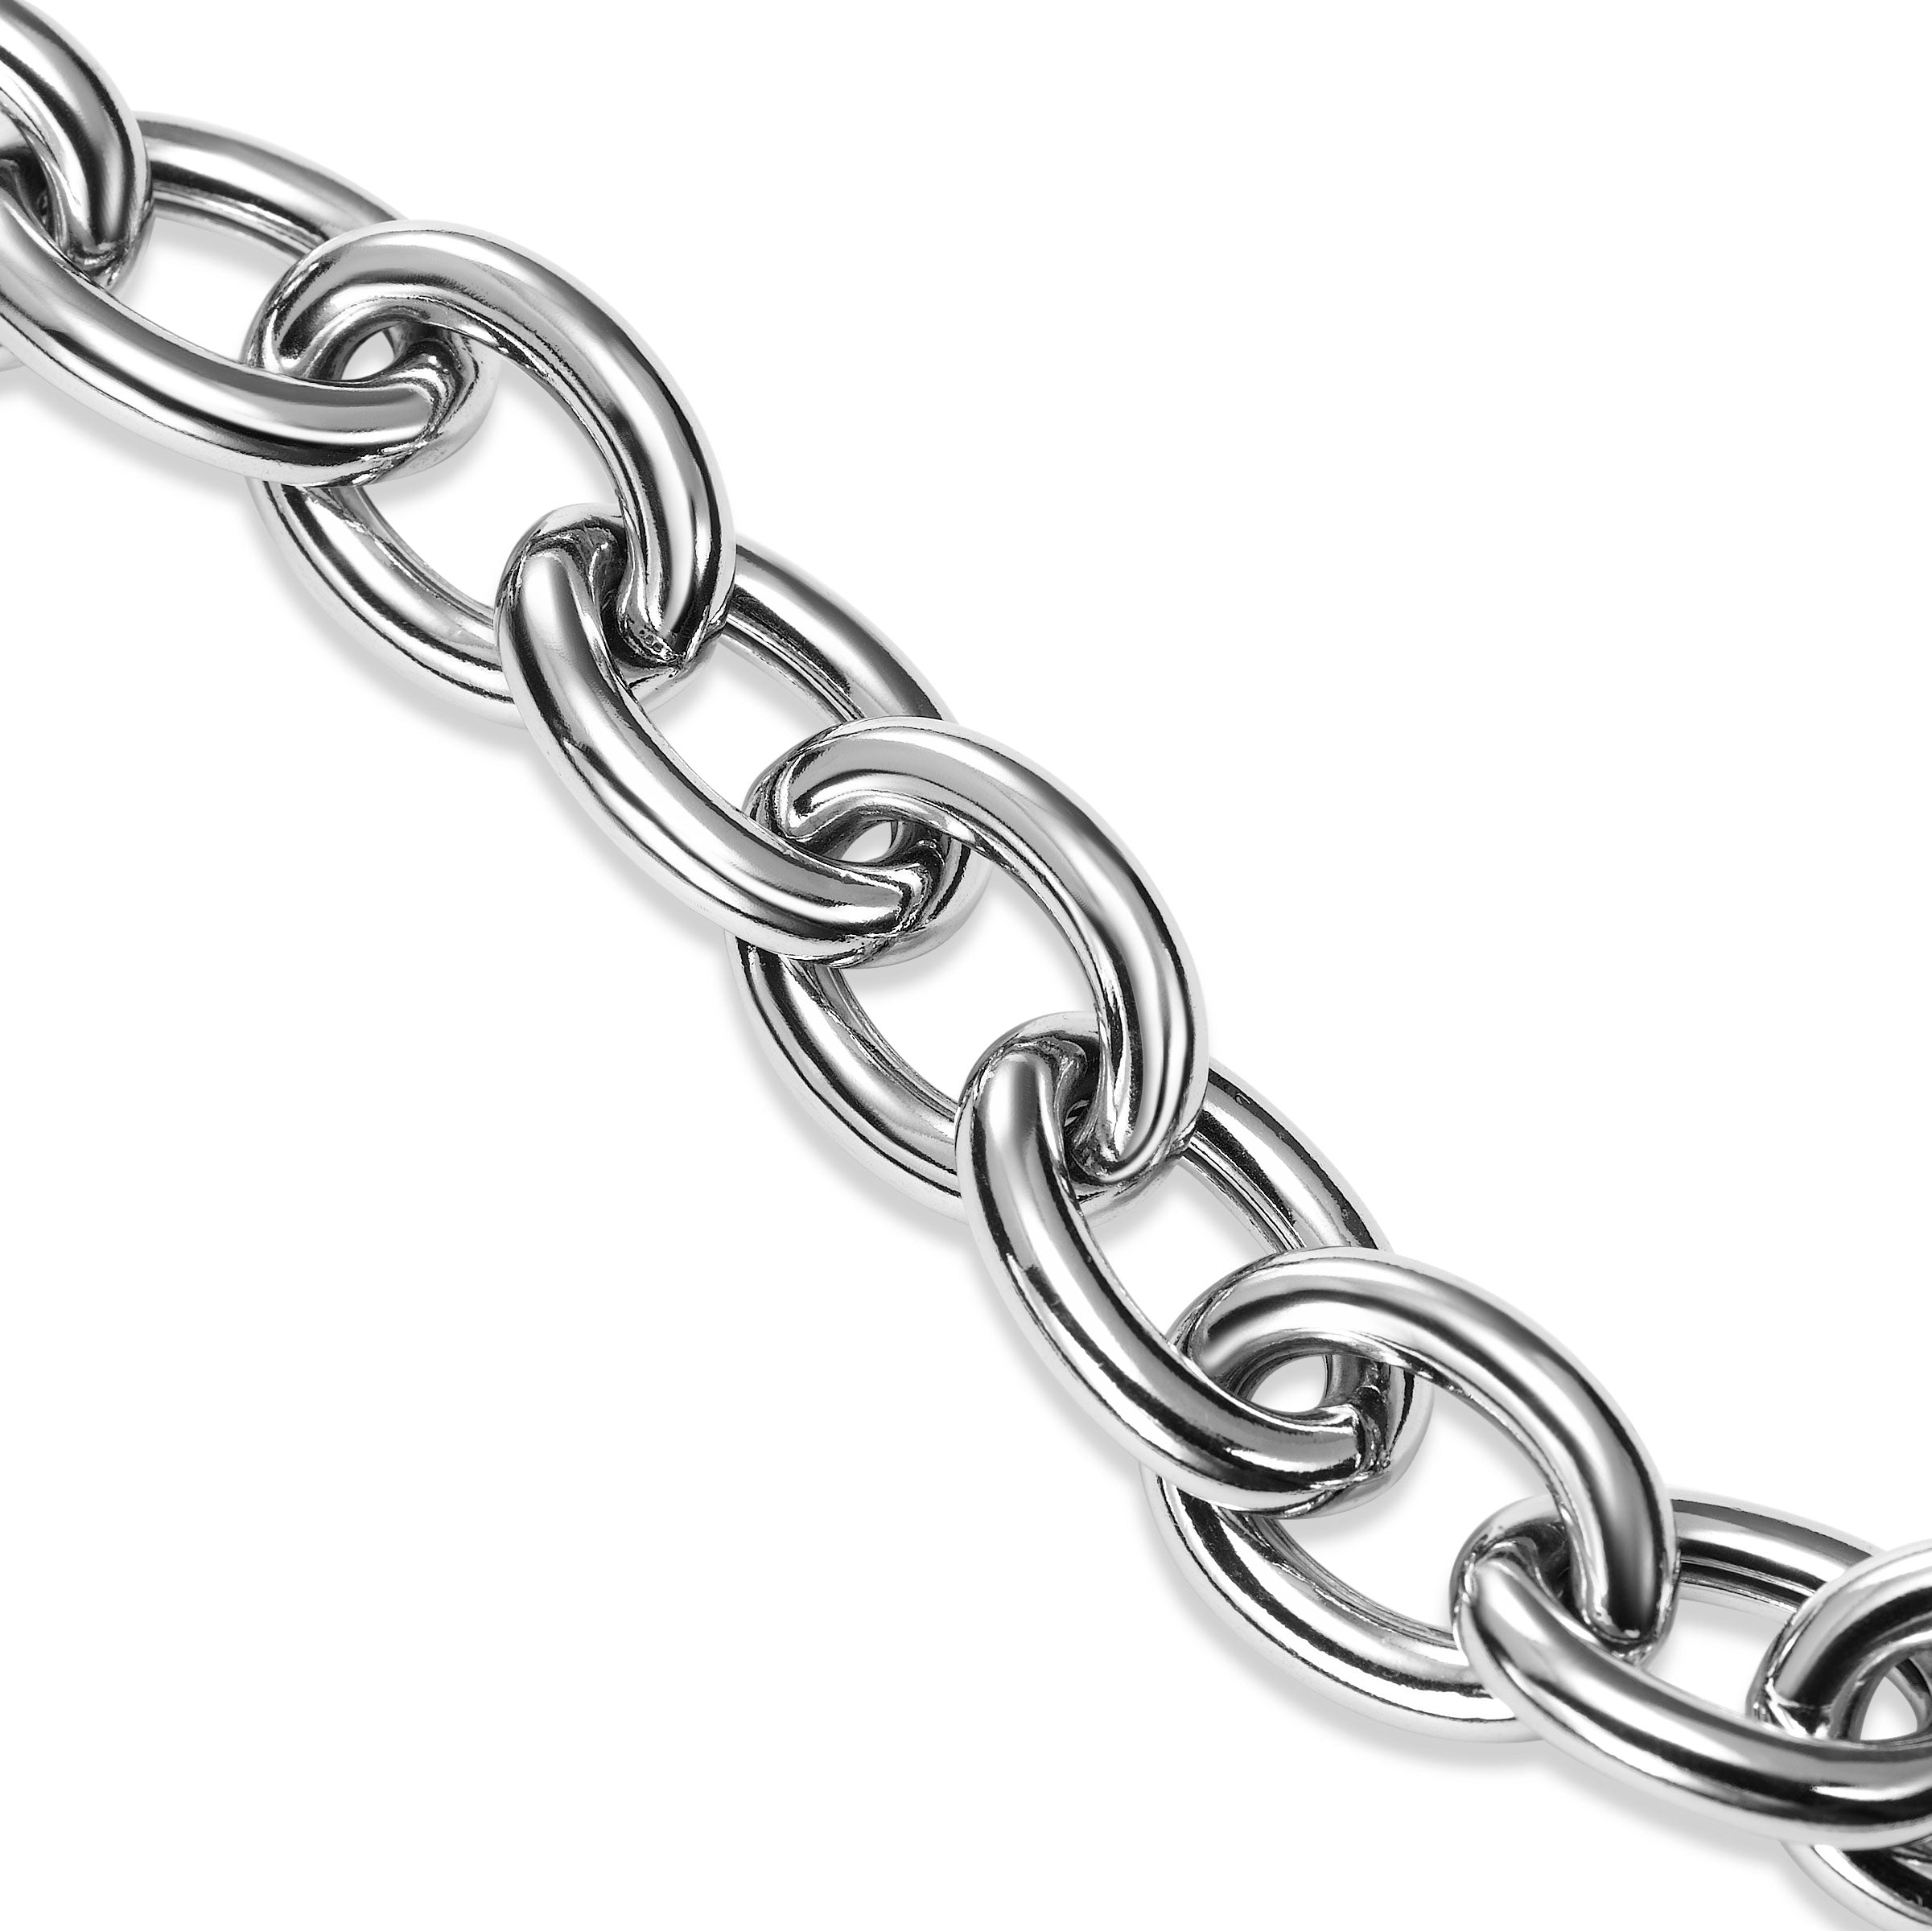 Large Oval Link Bracelet, Sterling Silver | Silver Jewelry Stores Long ...